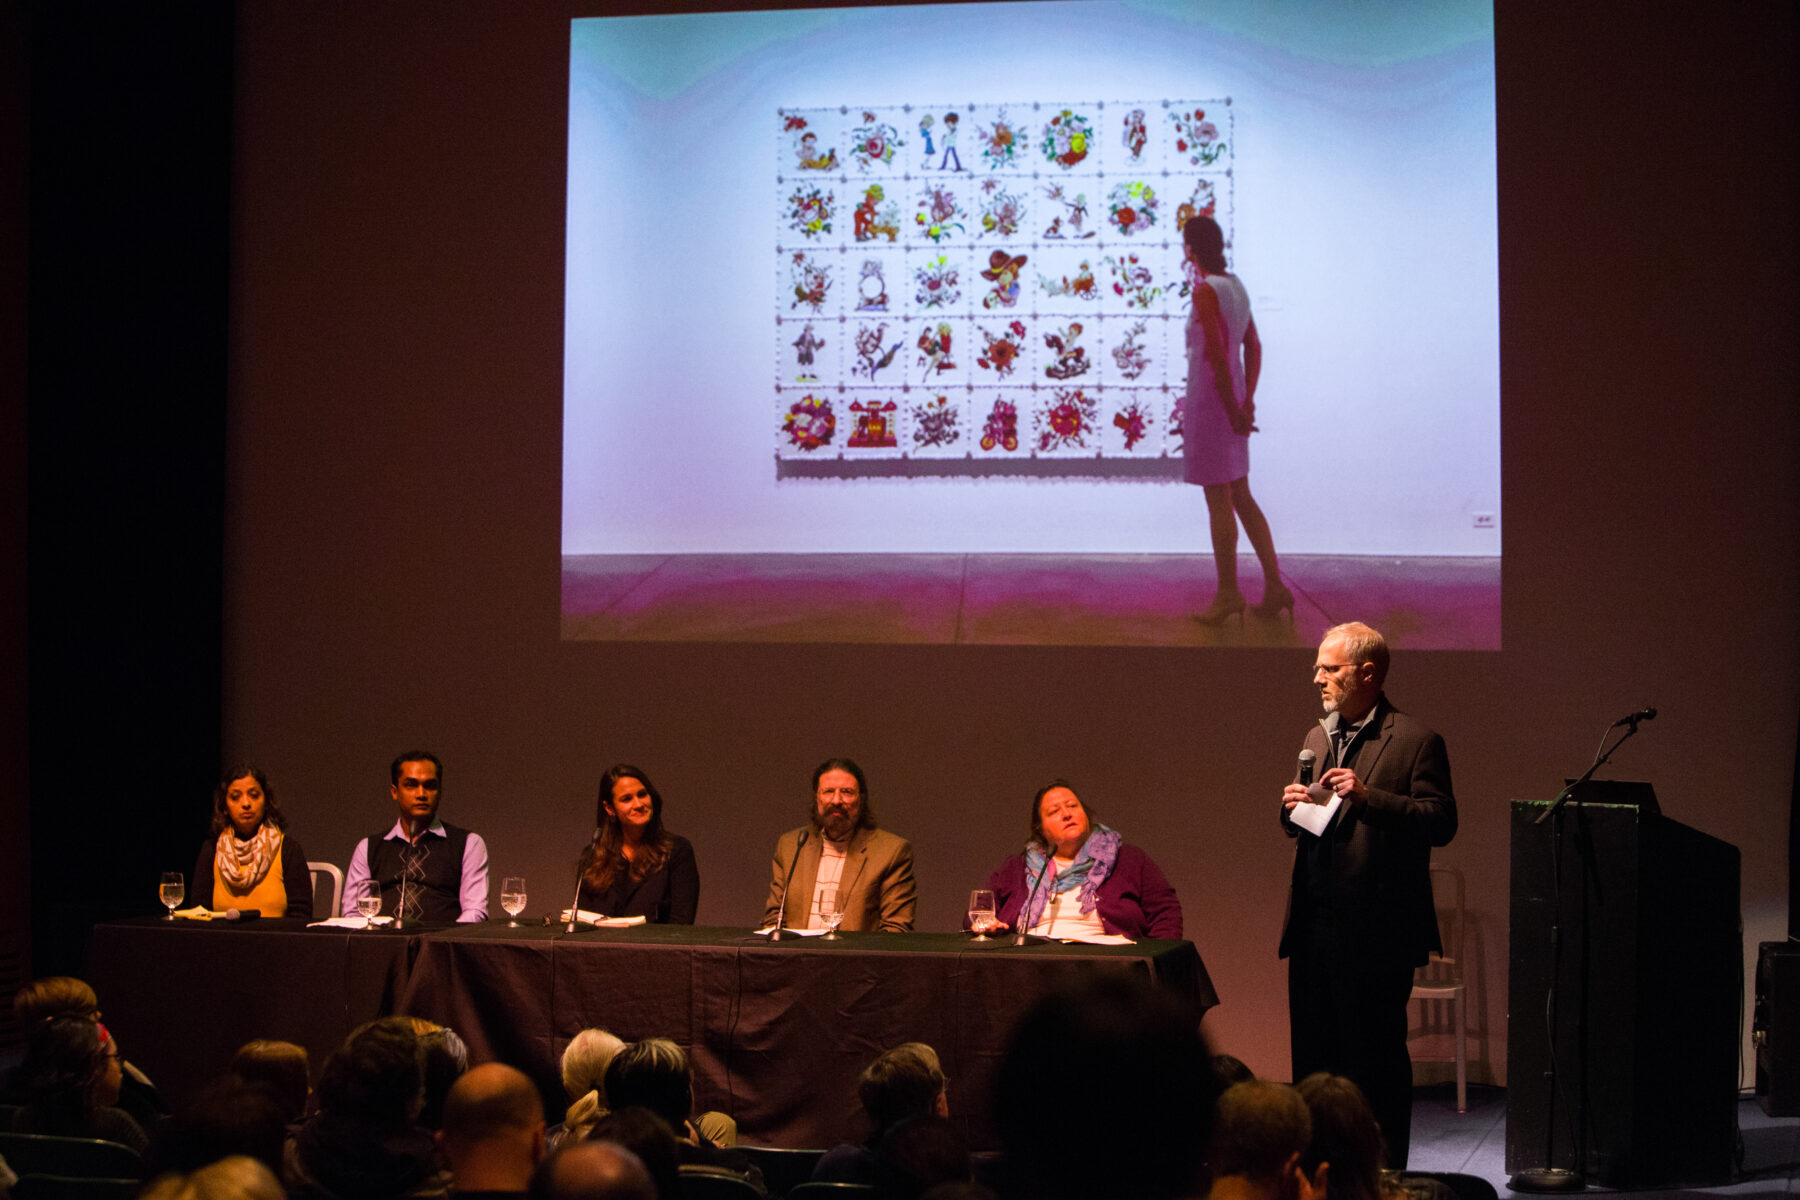 Five panelists are sitting at a table on the left side of a stage. They look towards a man who is standing and speaking into a microphone. Projected behind them is a photo of a woman looking at a large artwork comprised of a 5 by 7 grid of smaller illustrations.